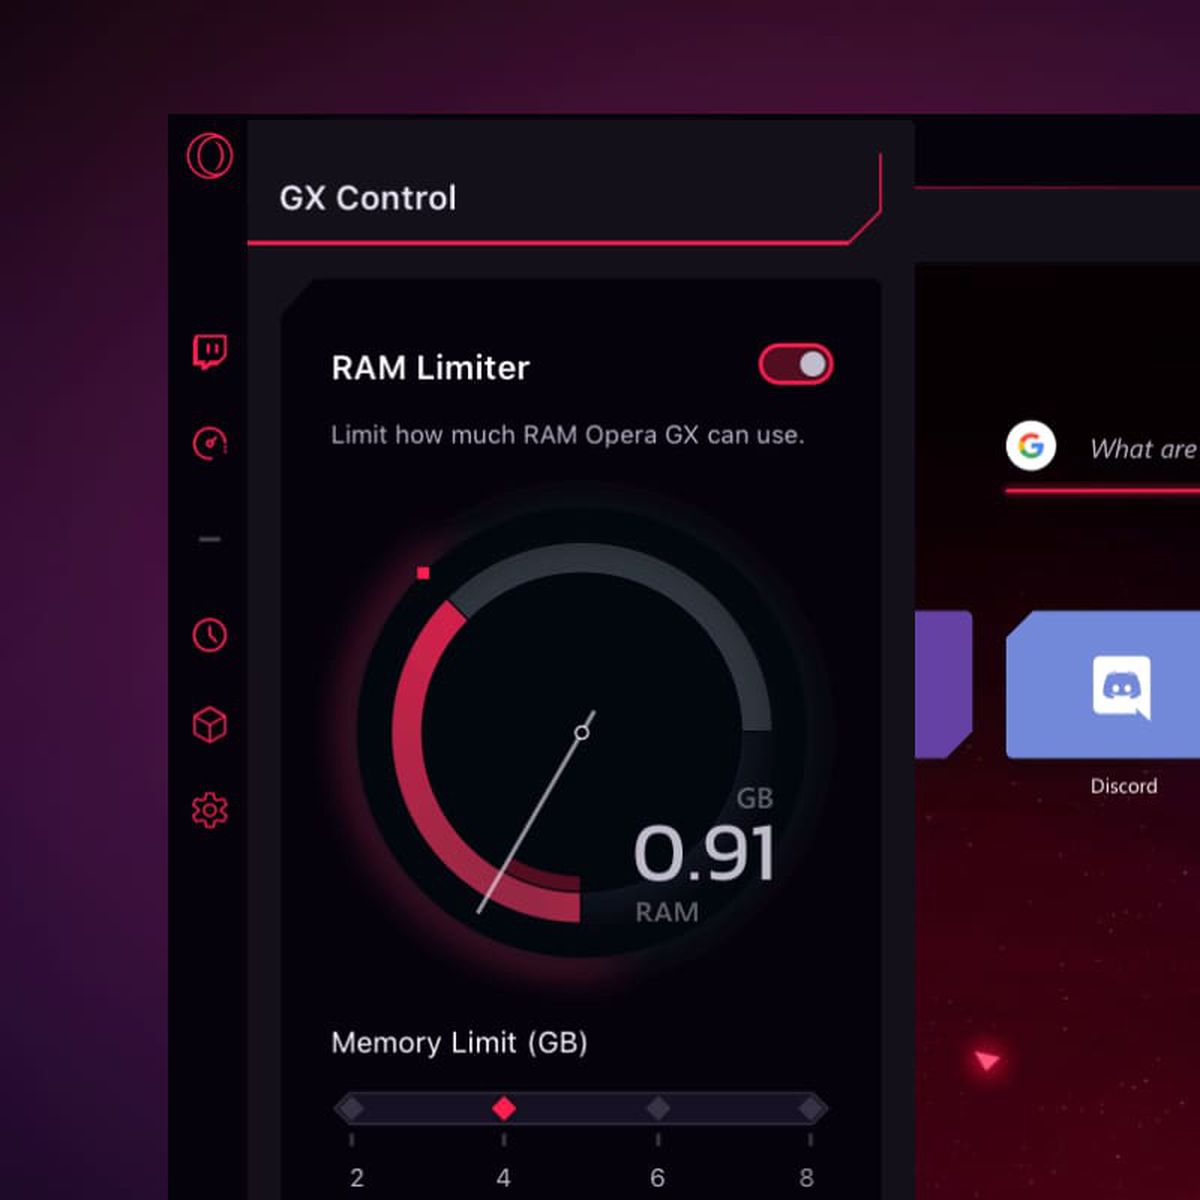 Opera Opens Early Access to the World's First Gaming Browser, Opera GX